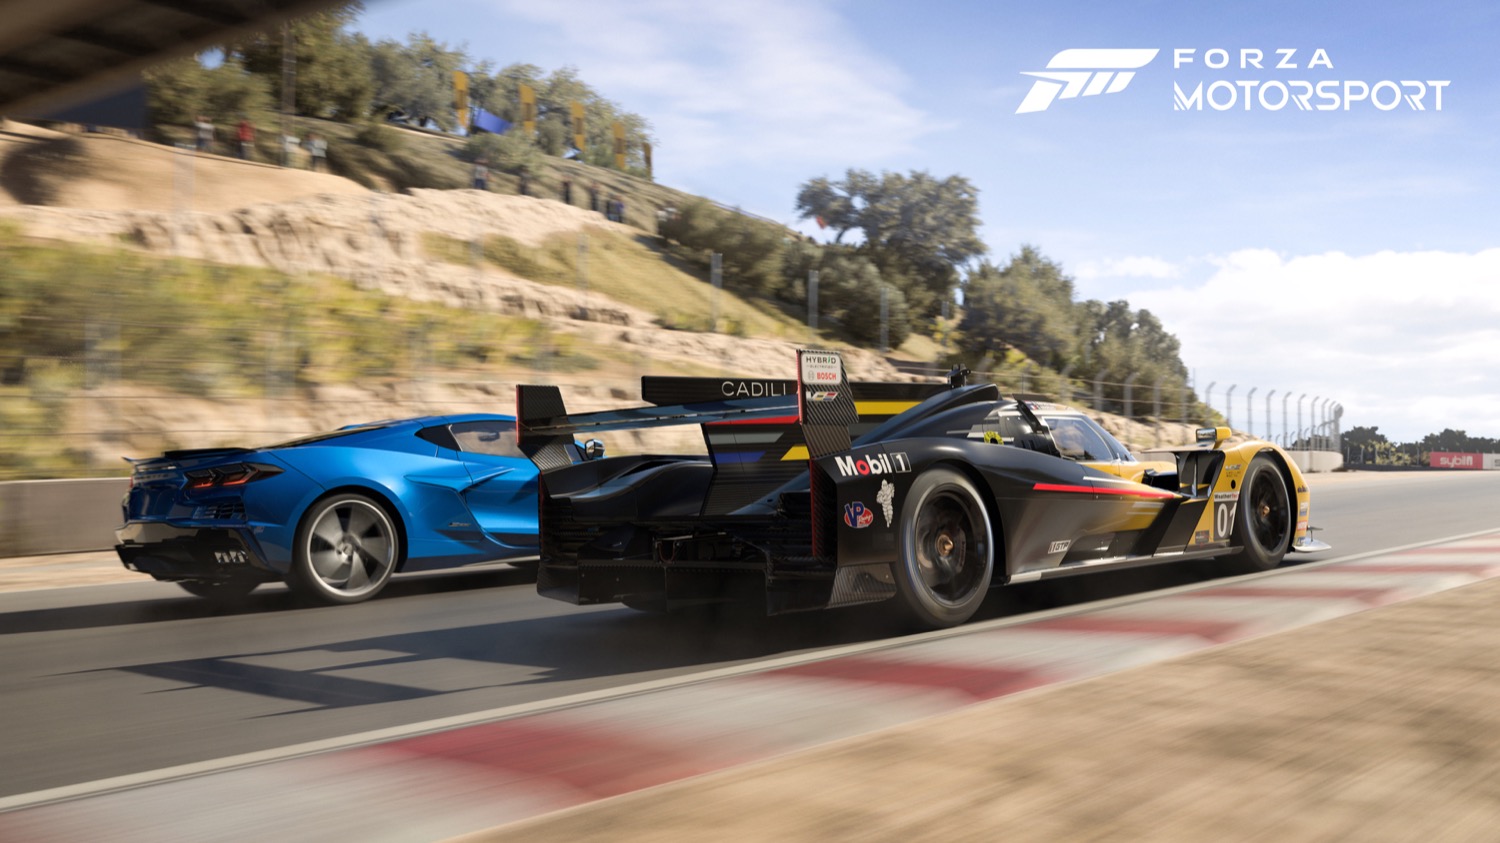 See you at the start! - Forza Motorsport developers presented the